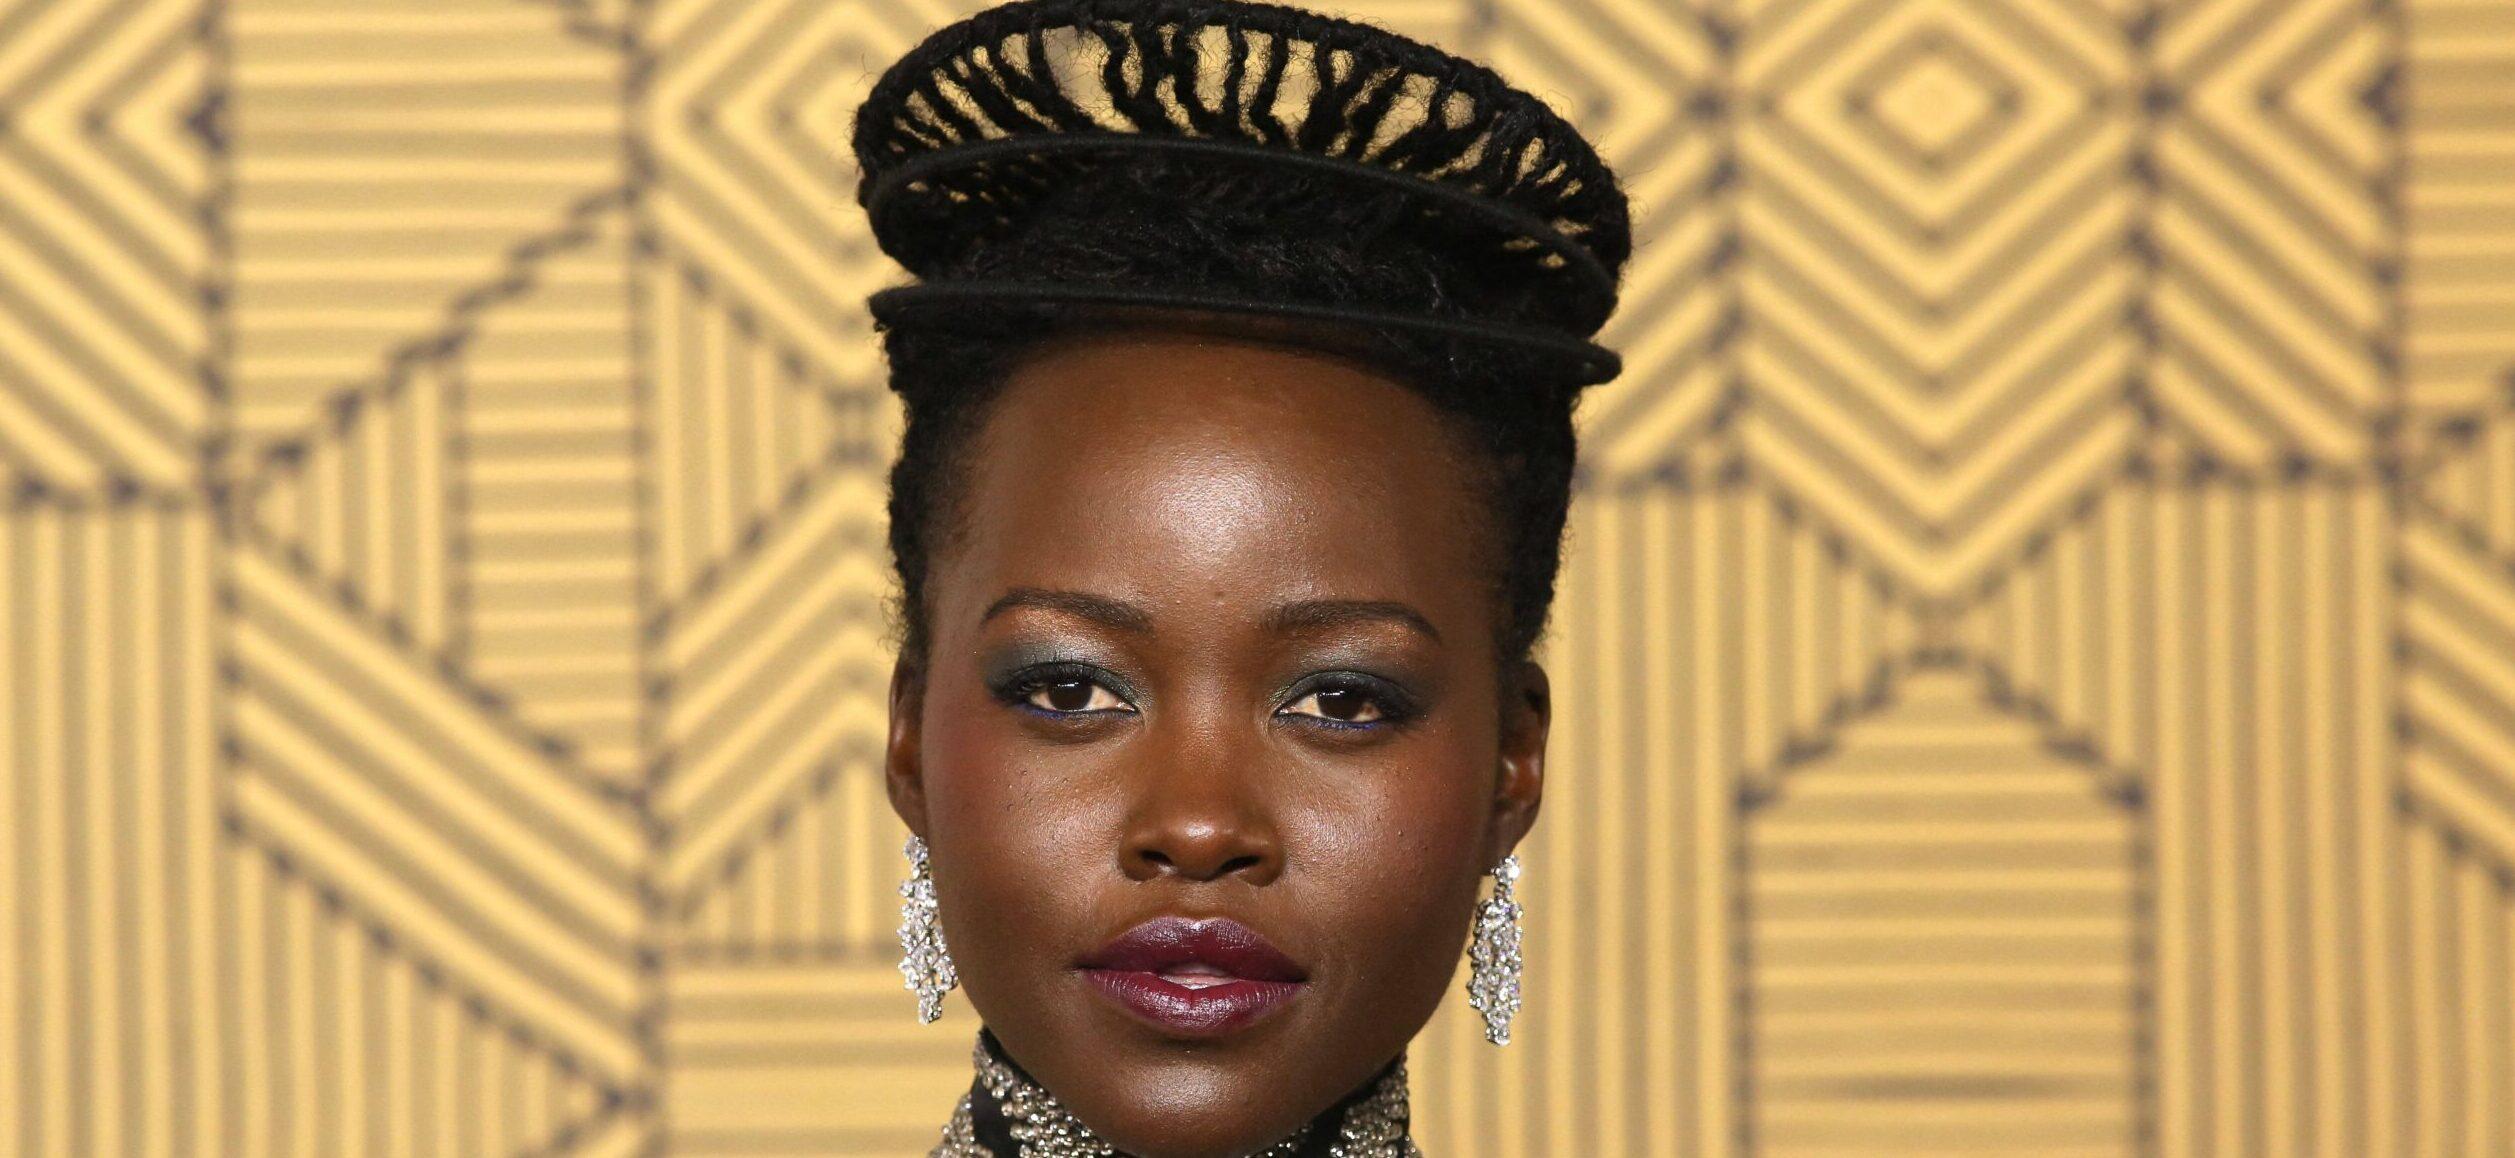 Lupita Nyong’o Flaunts Bold Bald Look To The Delight Of Fans: ‘Happy Without Hair’